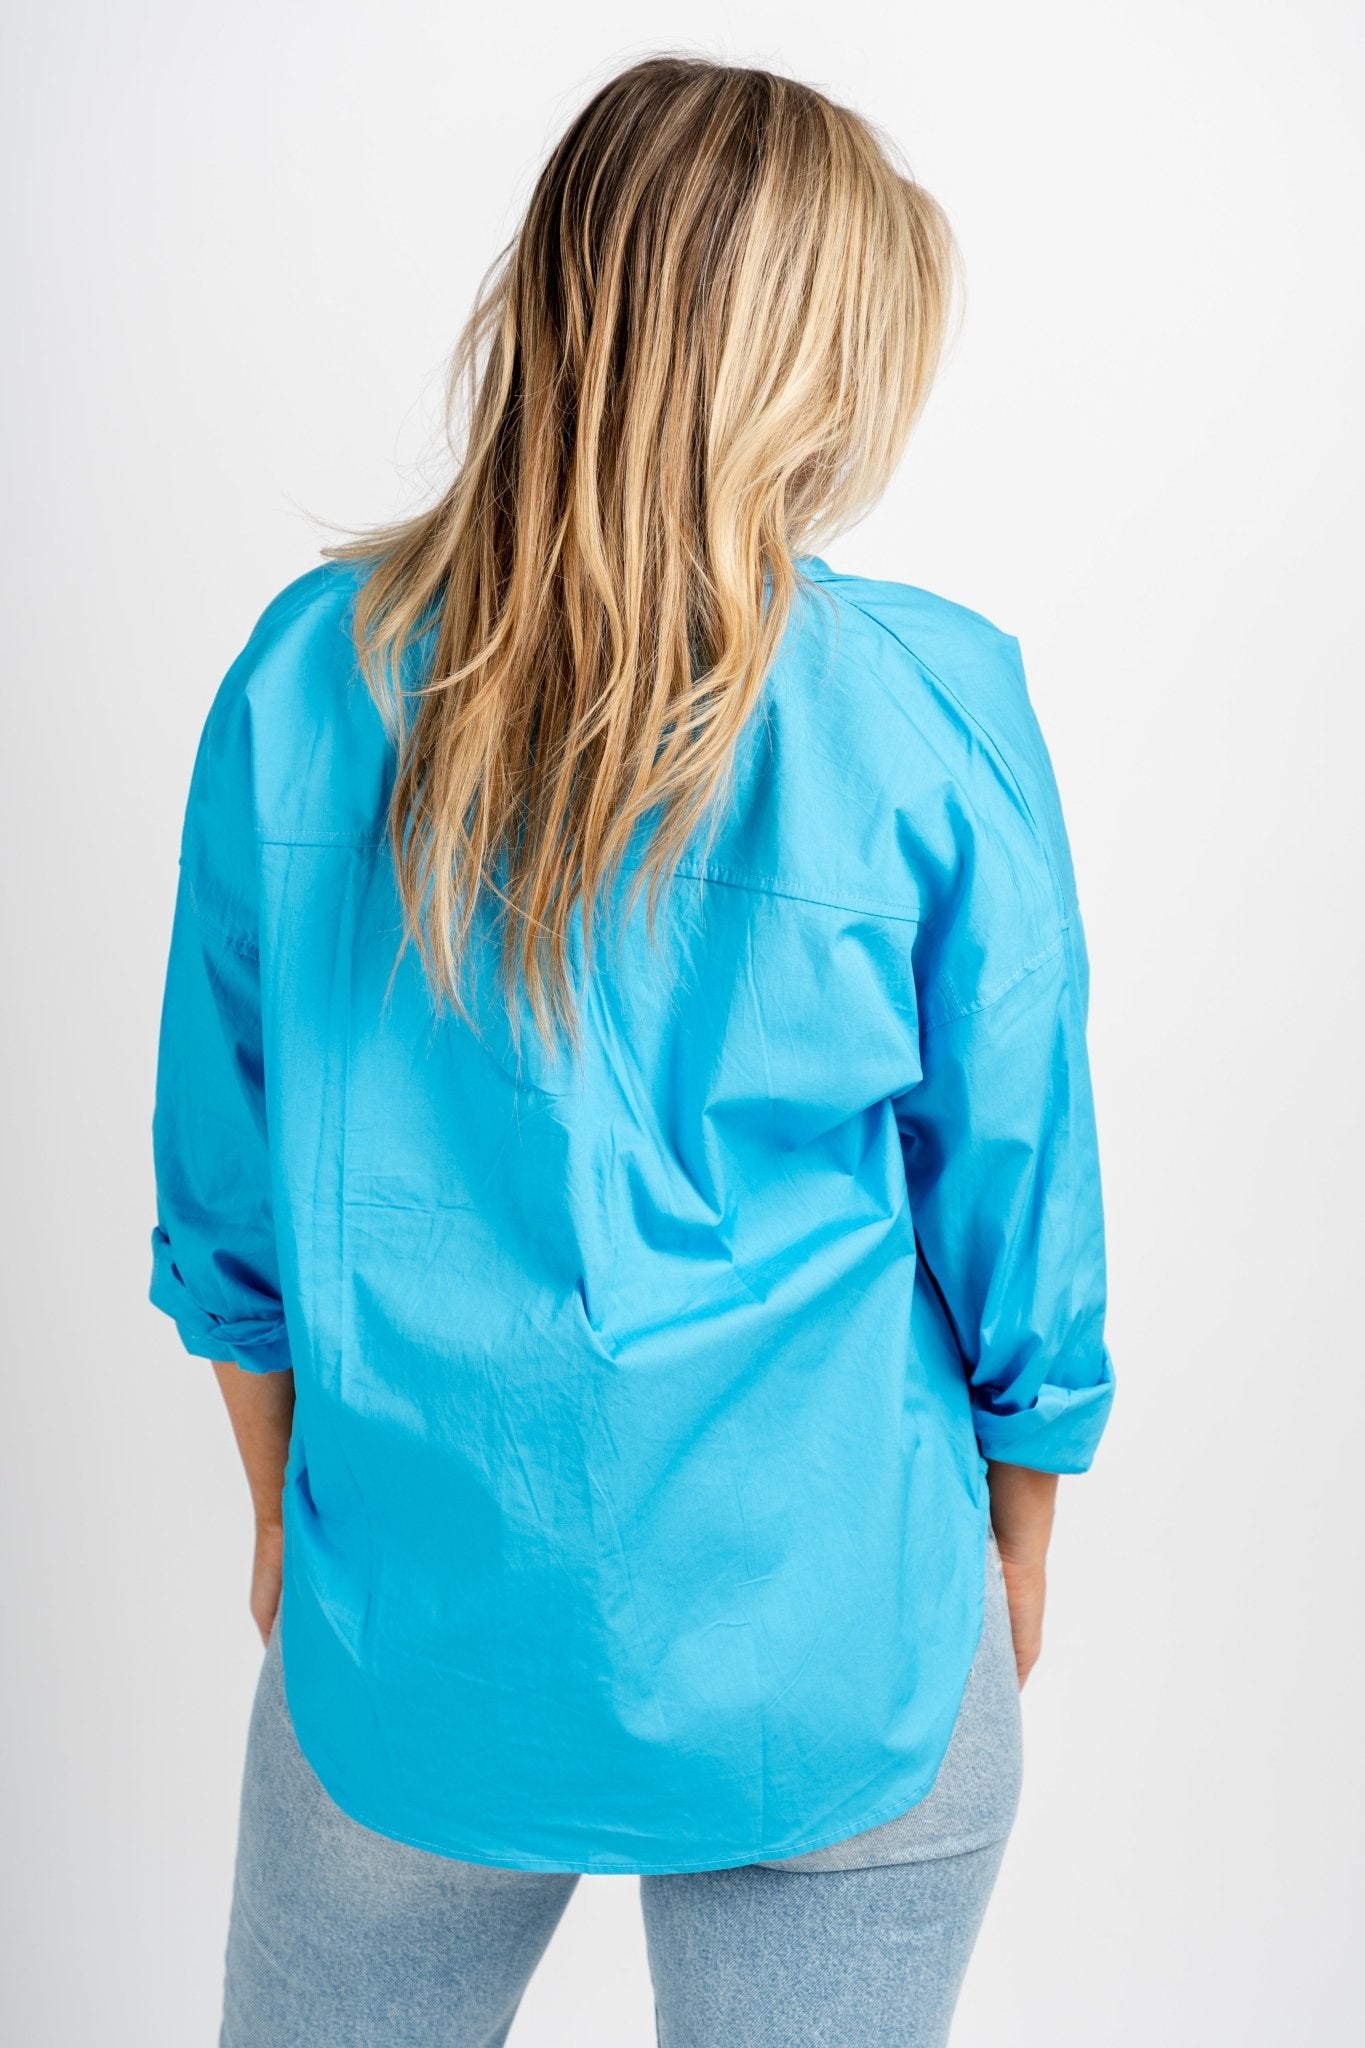 Oversized button down top blue